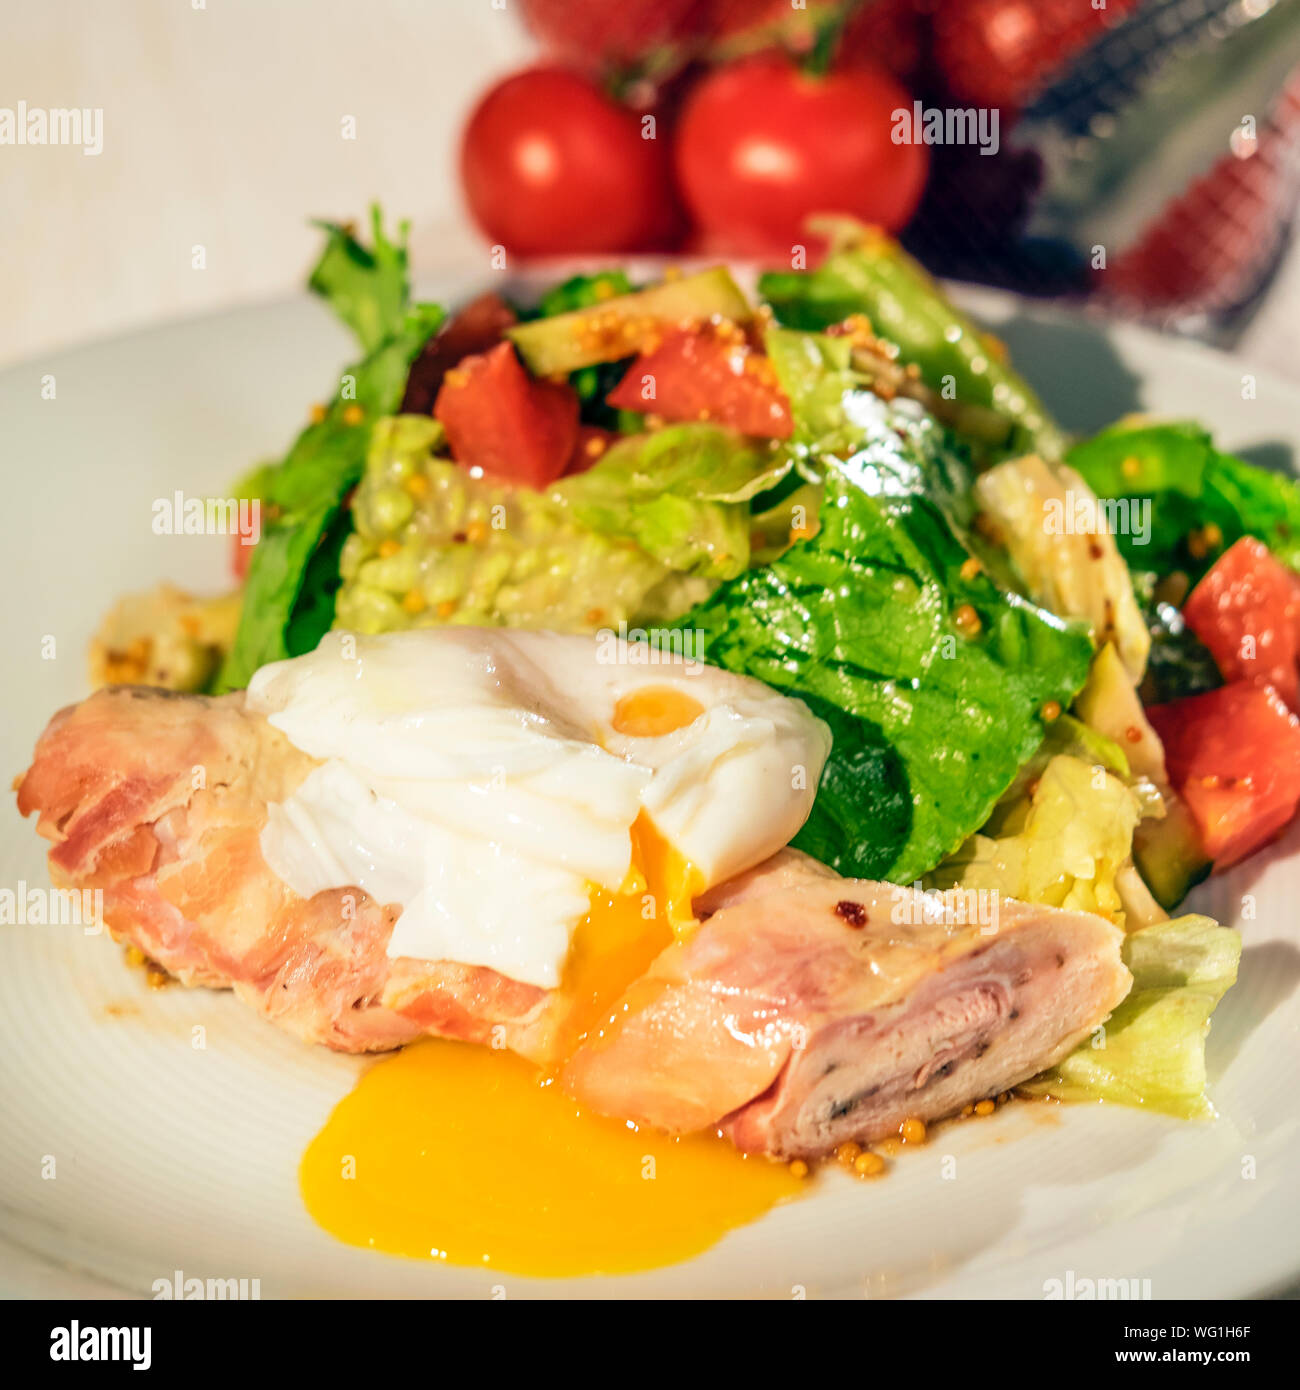 Close-up Of Salad With Poached Egg In Plate Stock Photo